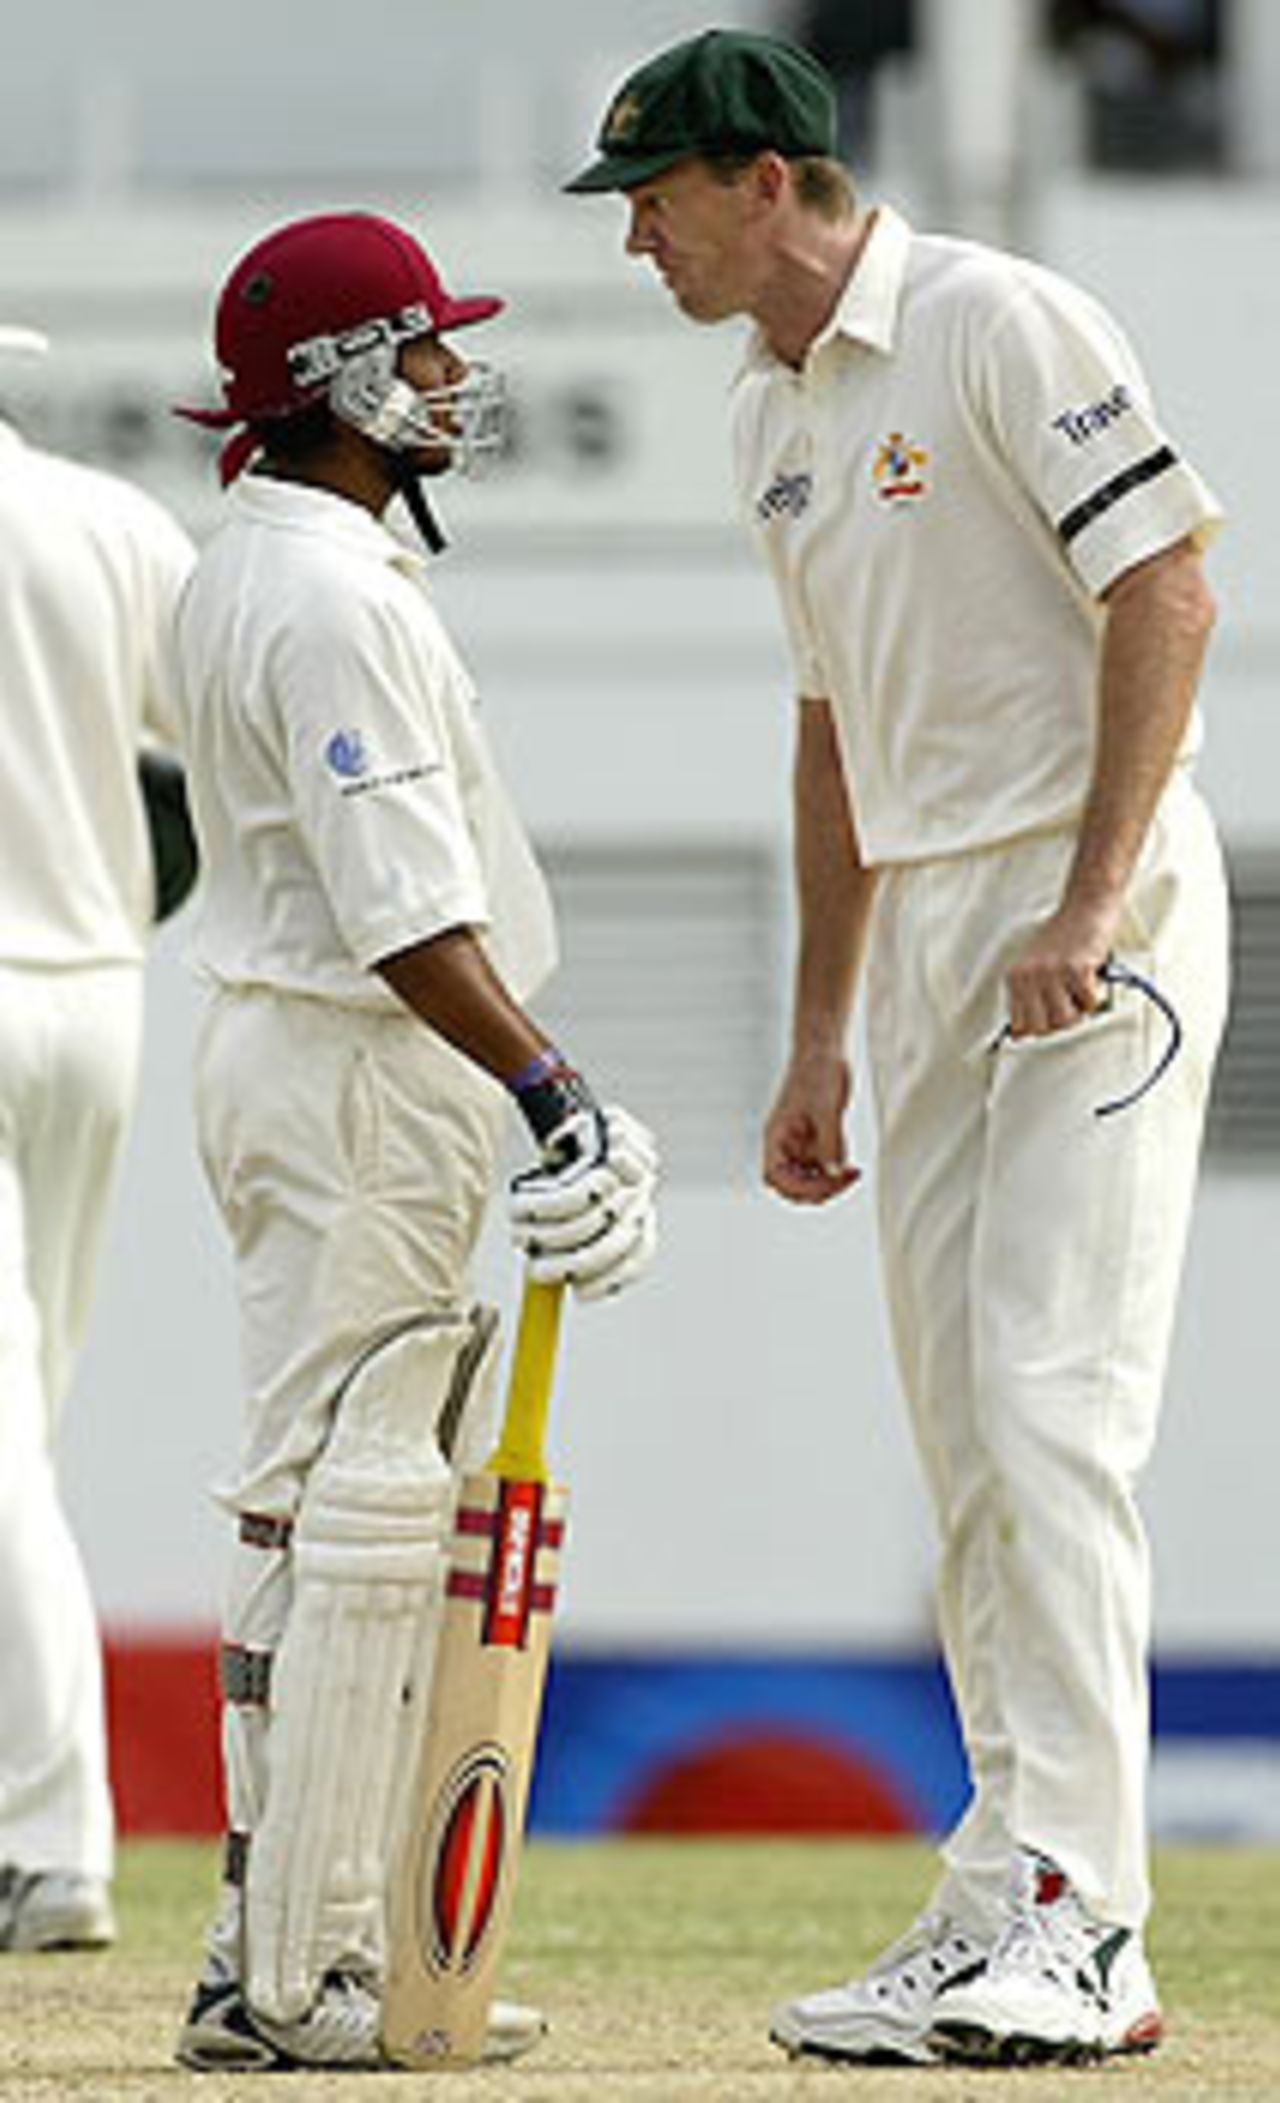 May 2003, Antigua: Words were exchanged with Sarwan, and a raw nerve was touched. The moment was over, but the image was enduring